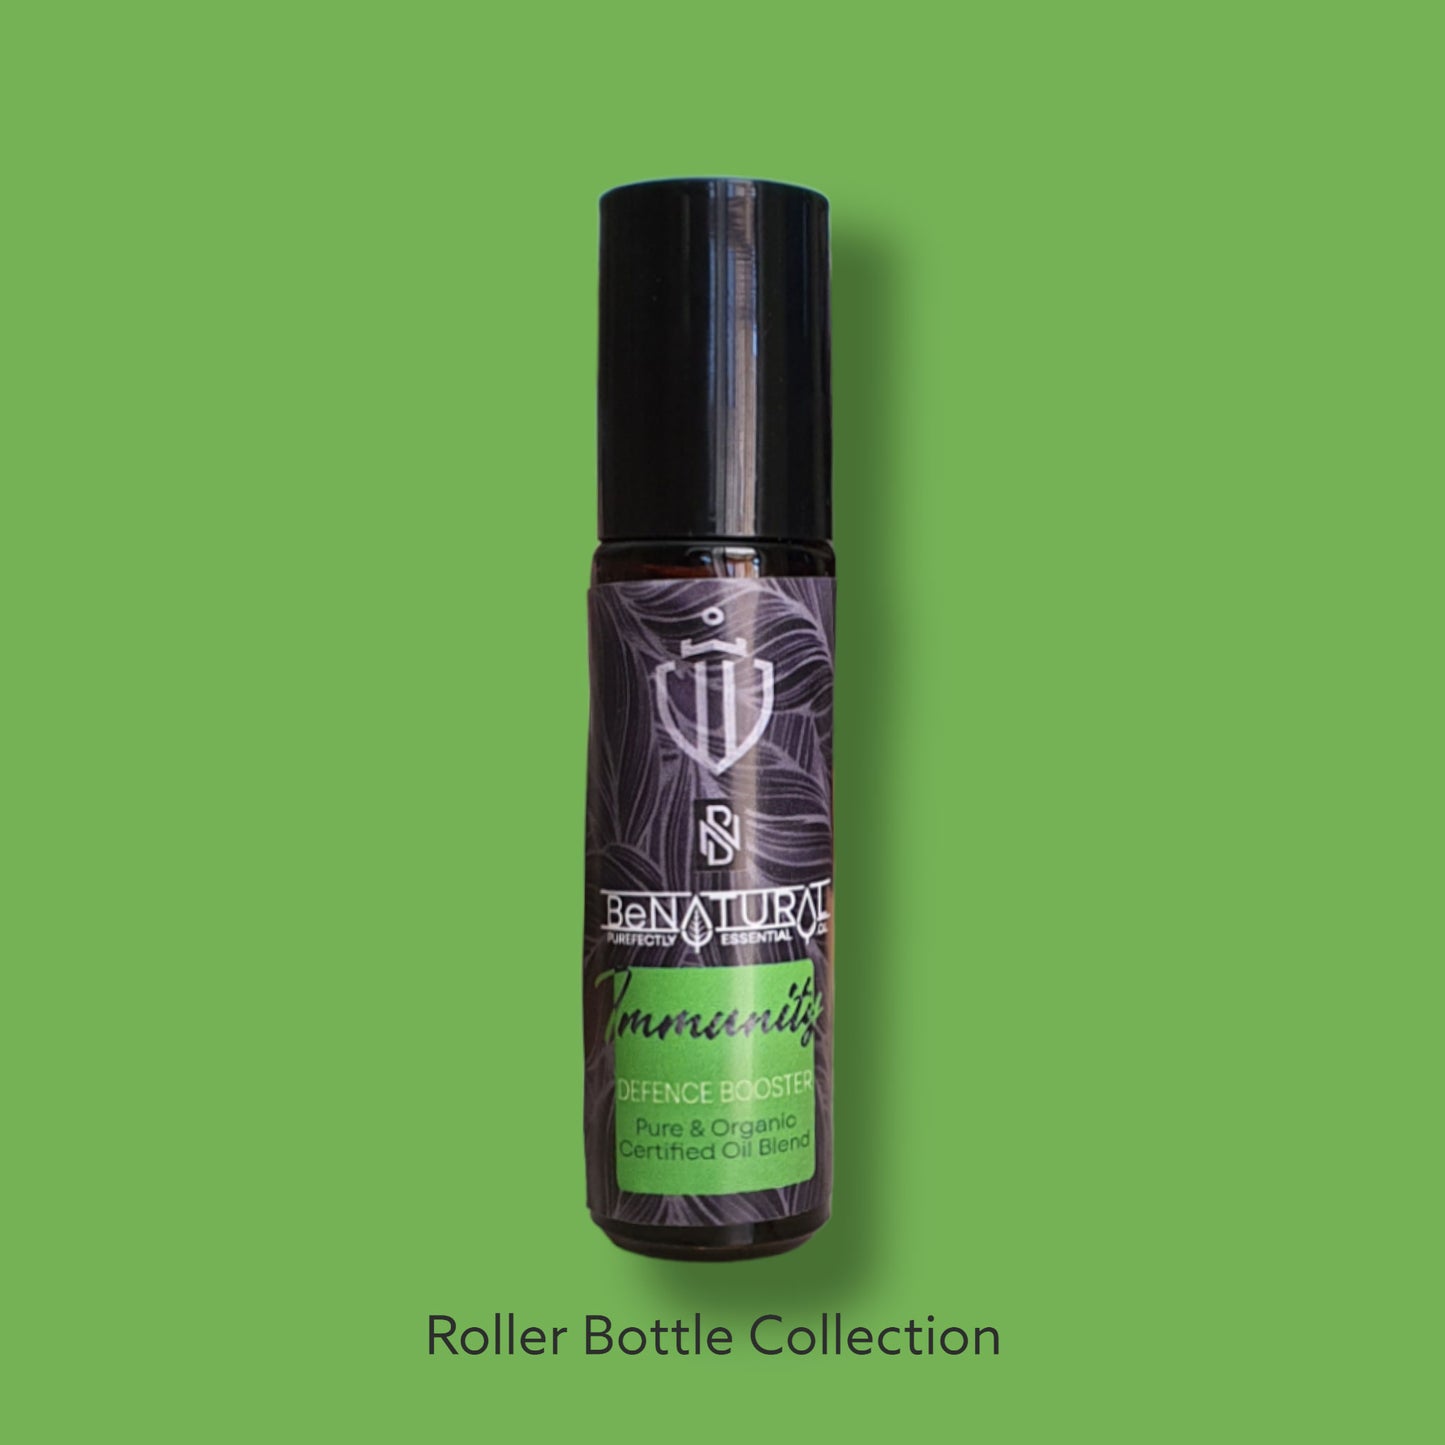 Be Natural's Immunity Organic Blend NOW IN A ROLLER BOTTLE